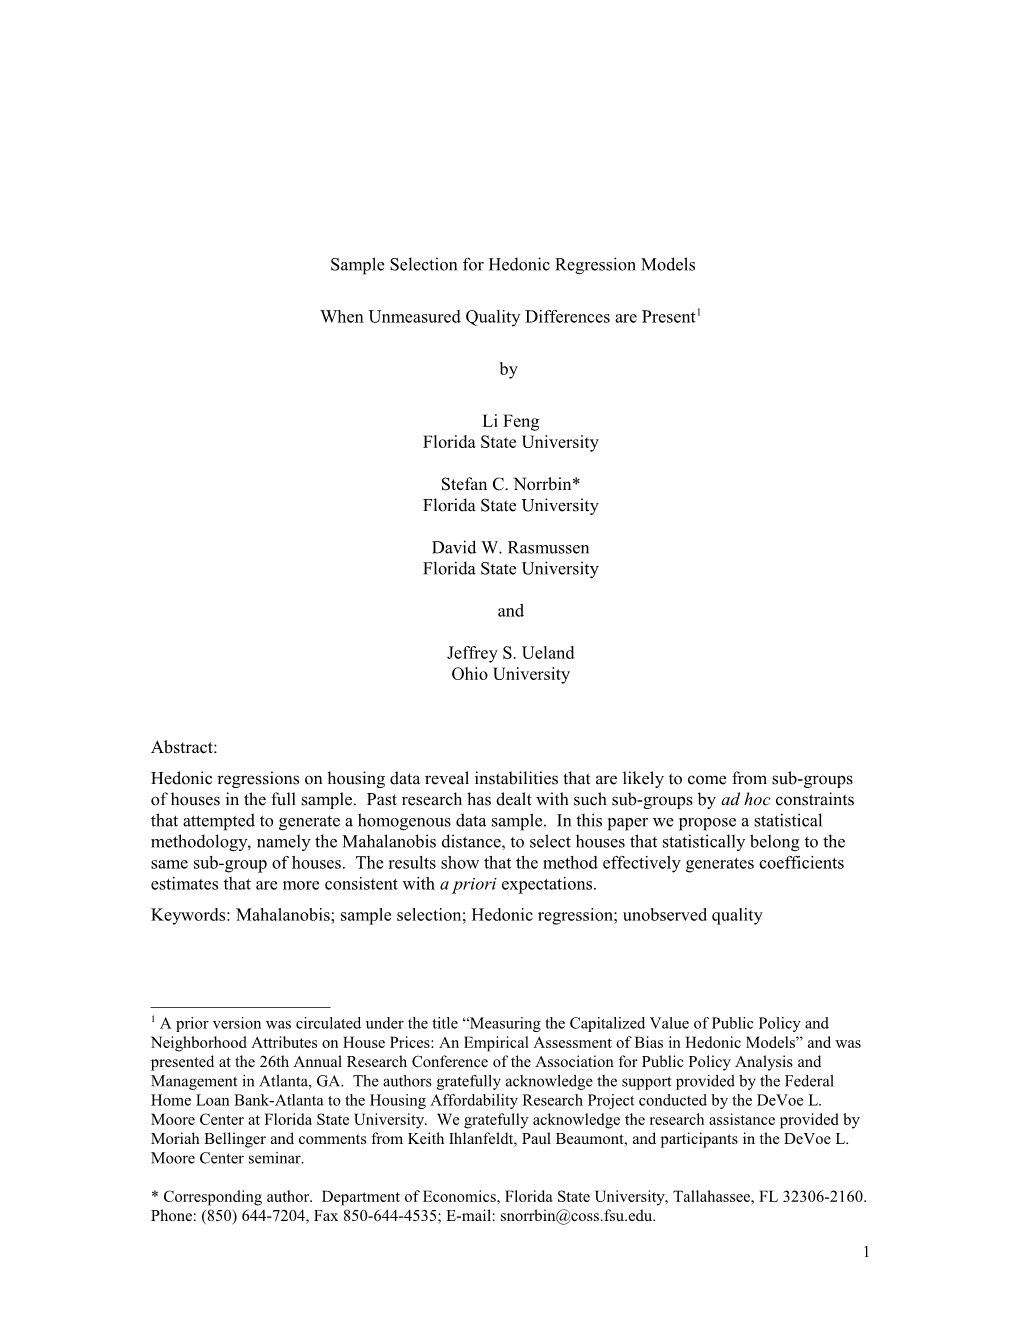 Sample Selection for Hedonic Regression Models